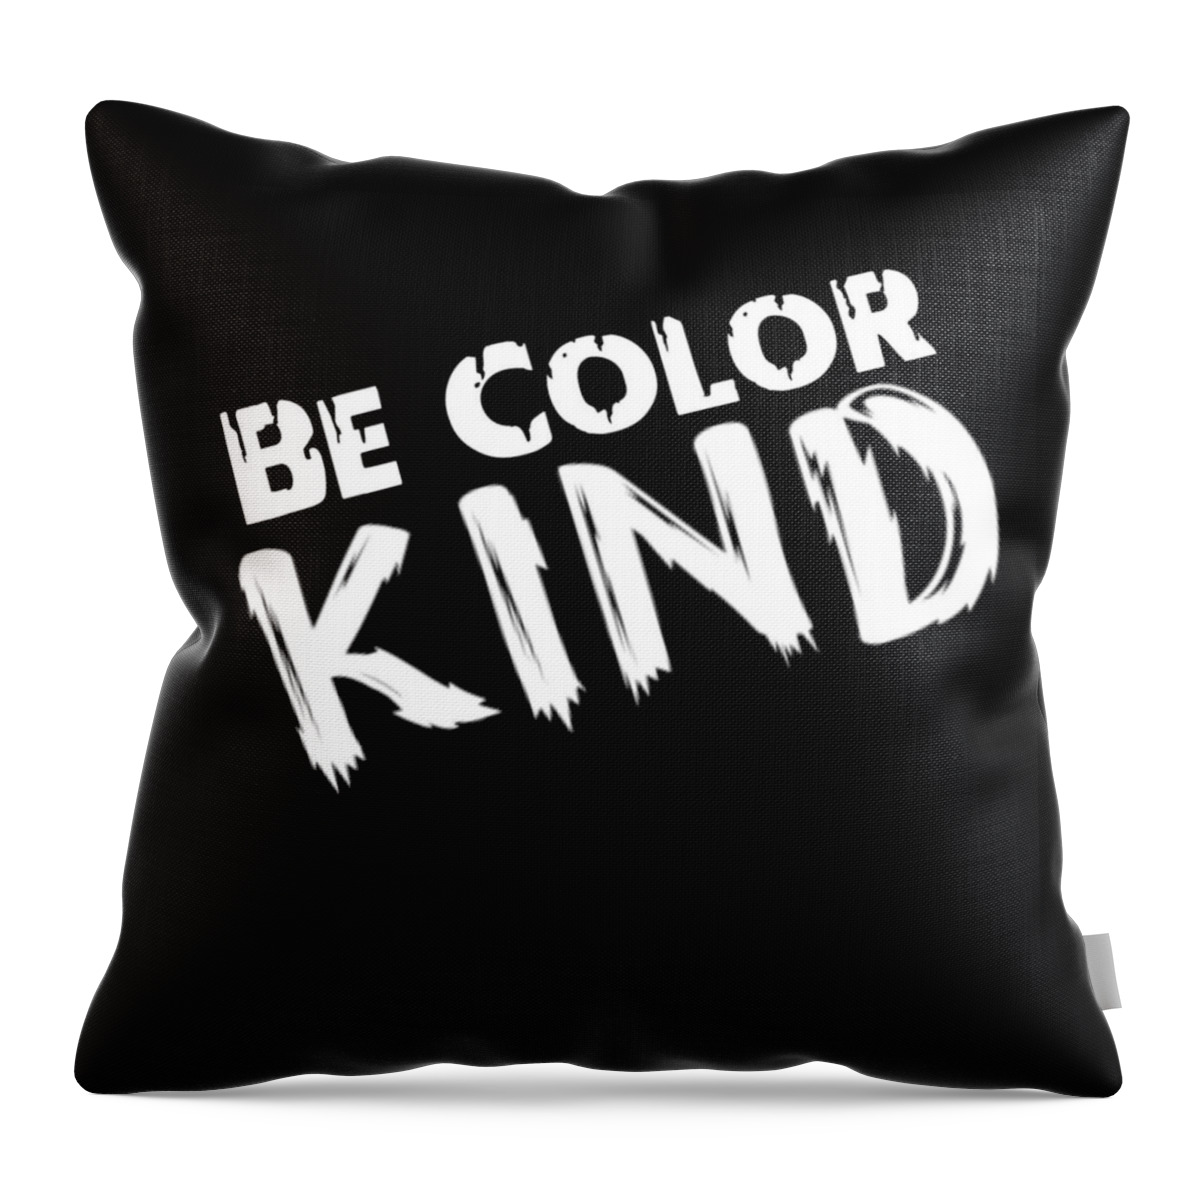  Throw Pillow featuring the digital art Be Color Kind by Tony Camm